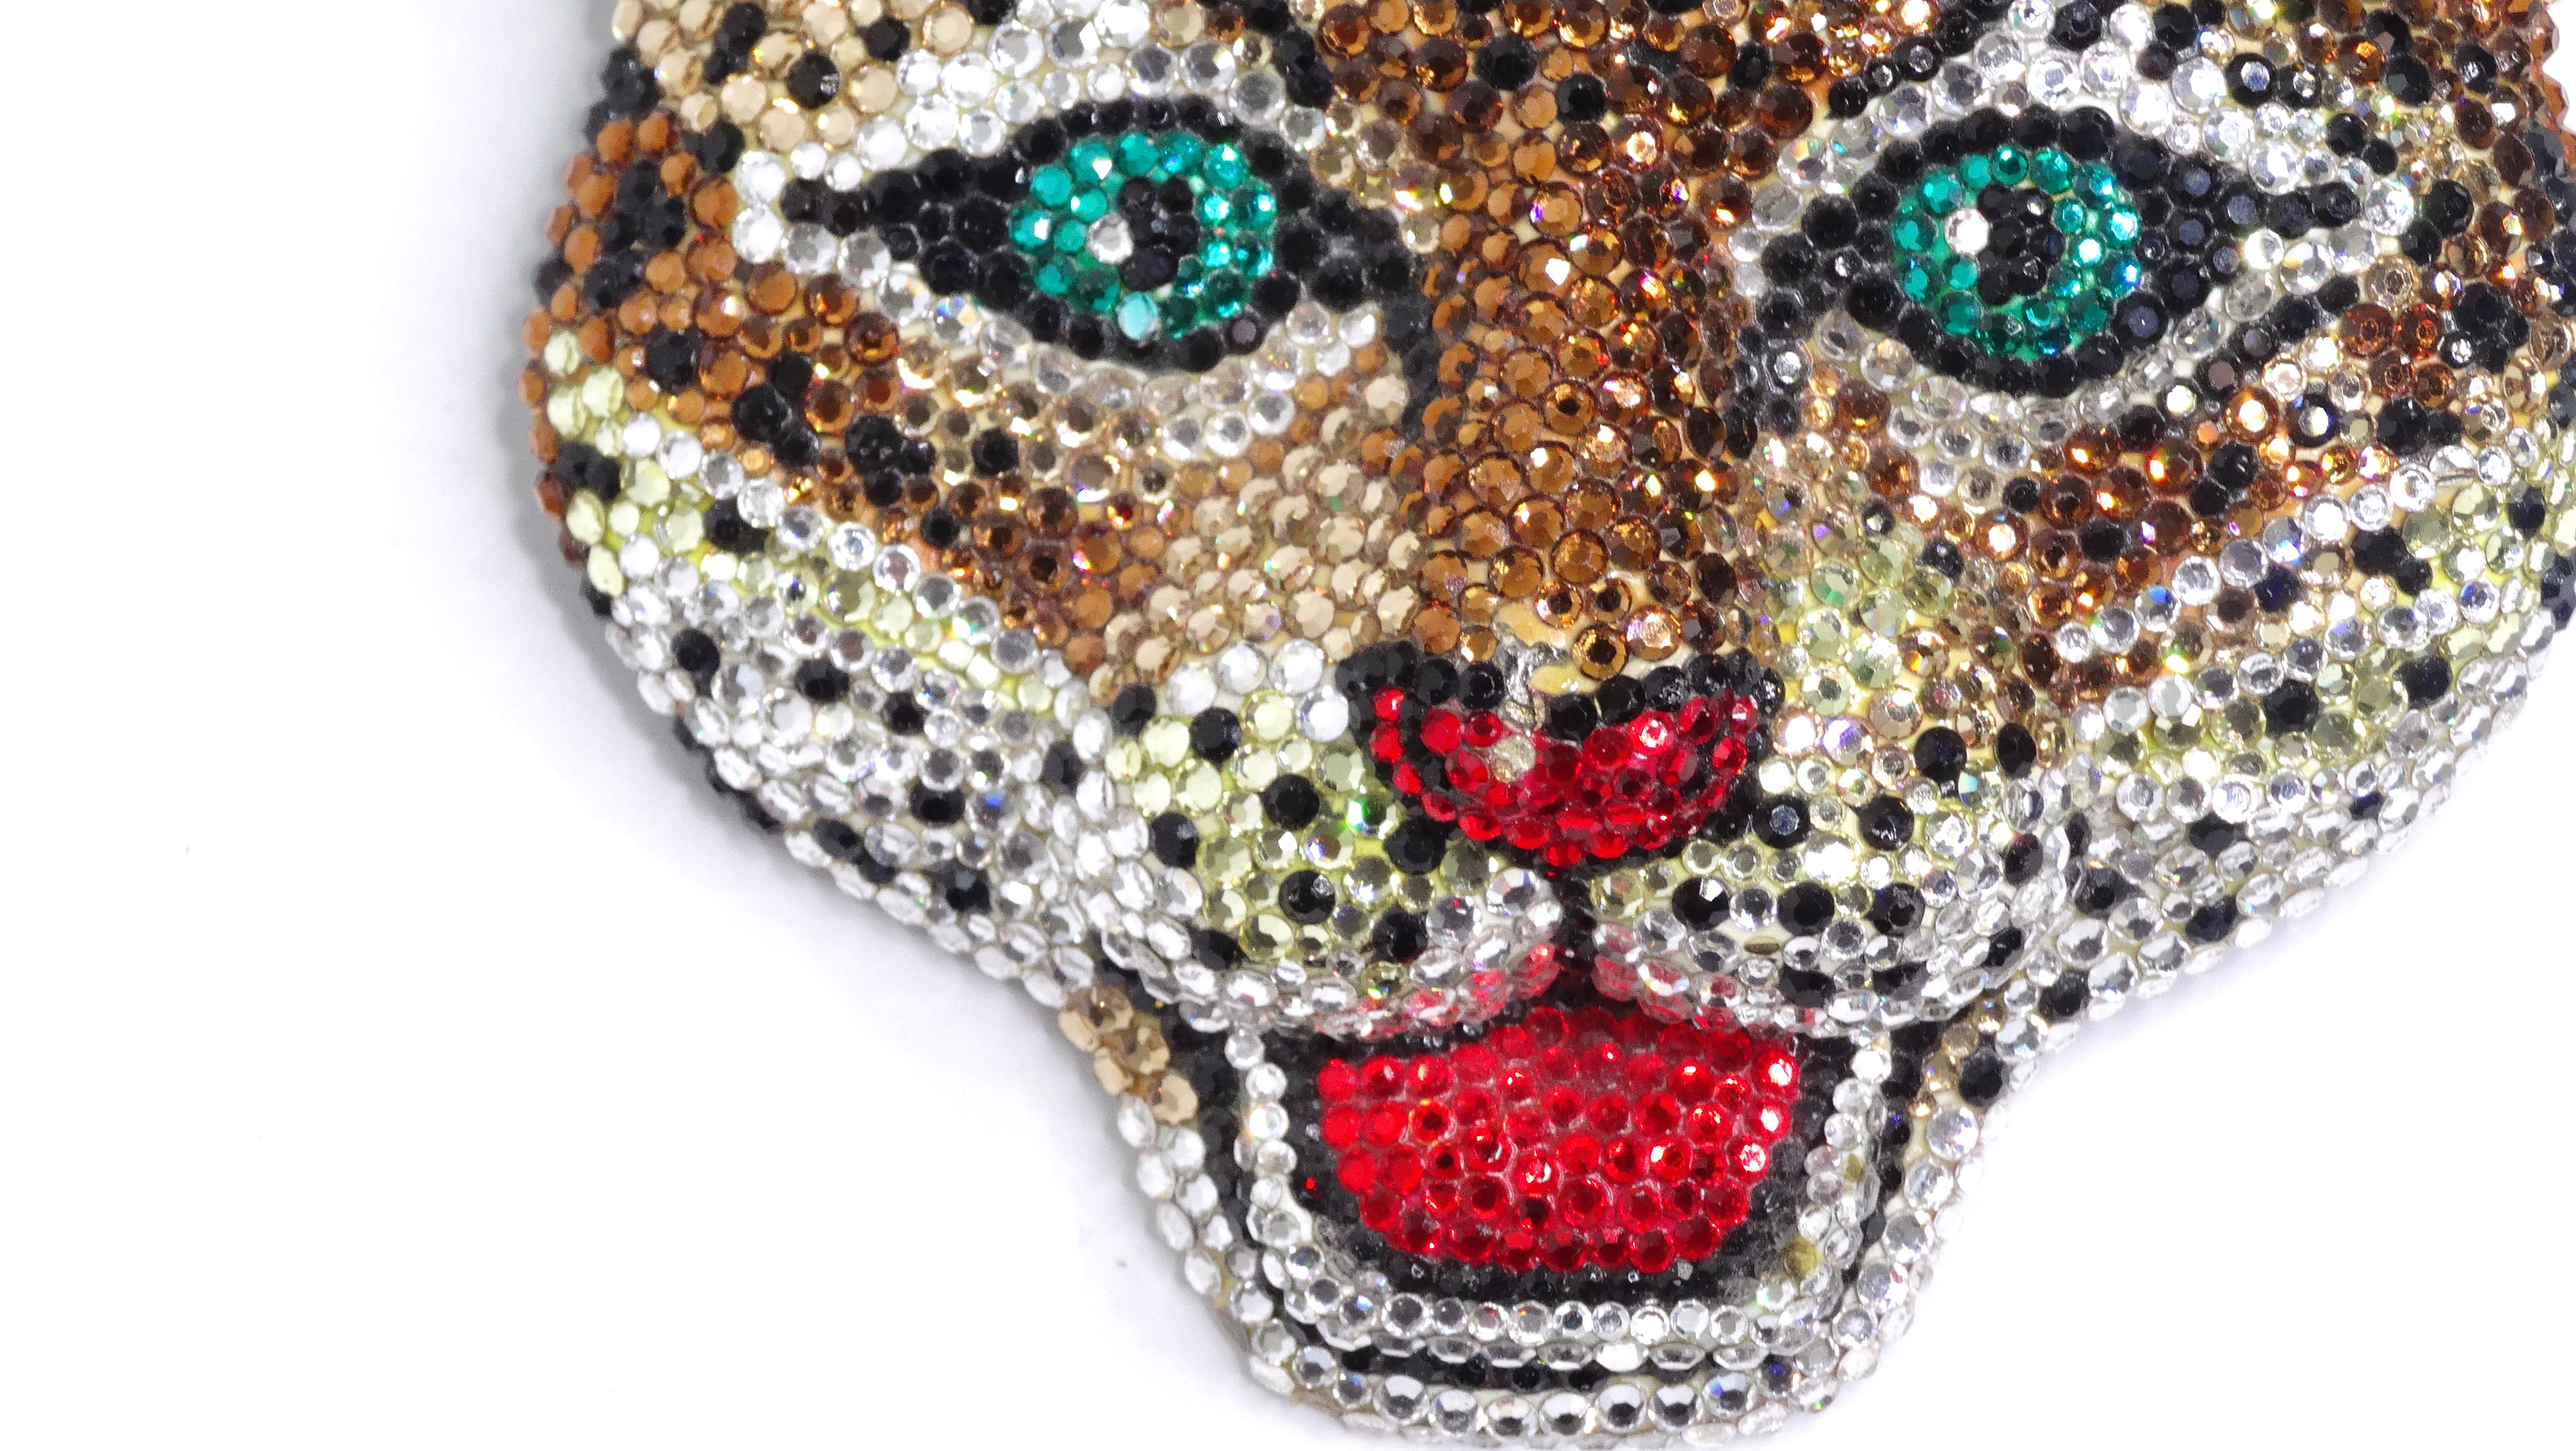 Calling all feline lovers! Add some GLAM to your belt buckle collection & catch someone's attention from across the room with the sparkle. This intricate Leopard buckle is designed and signed by Kathrine Baumann in 1993 and completely adorned in